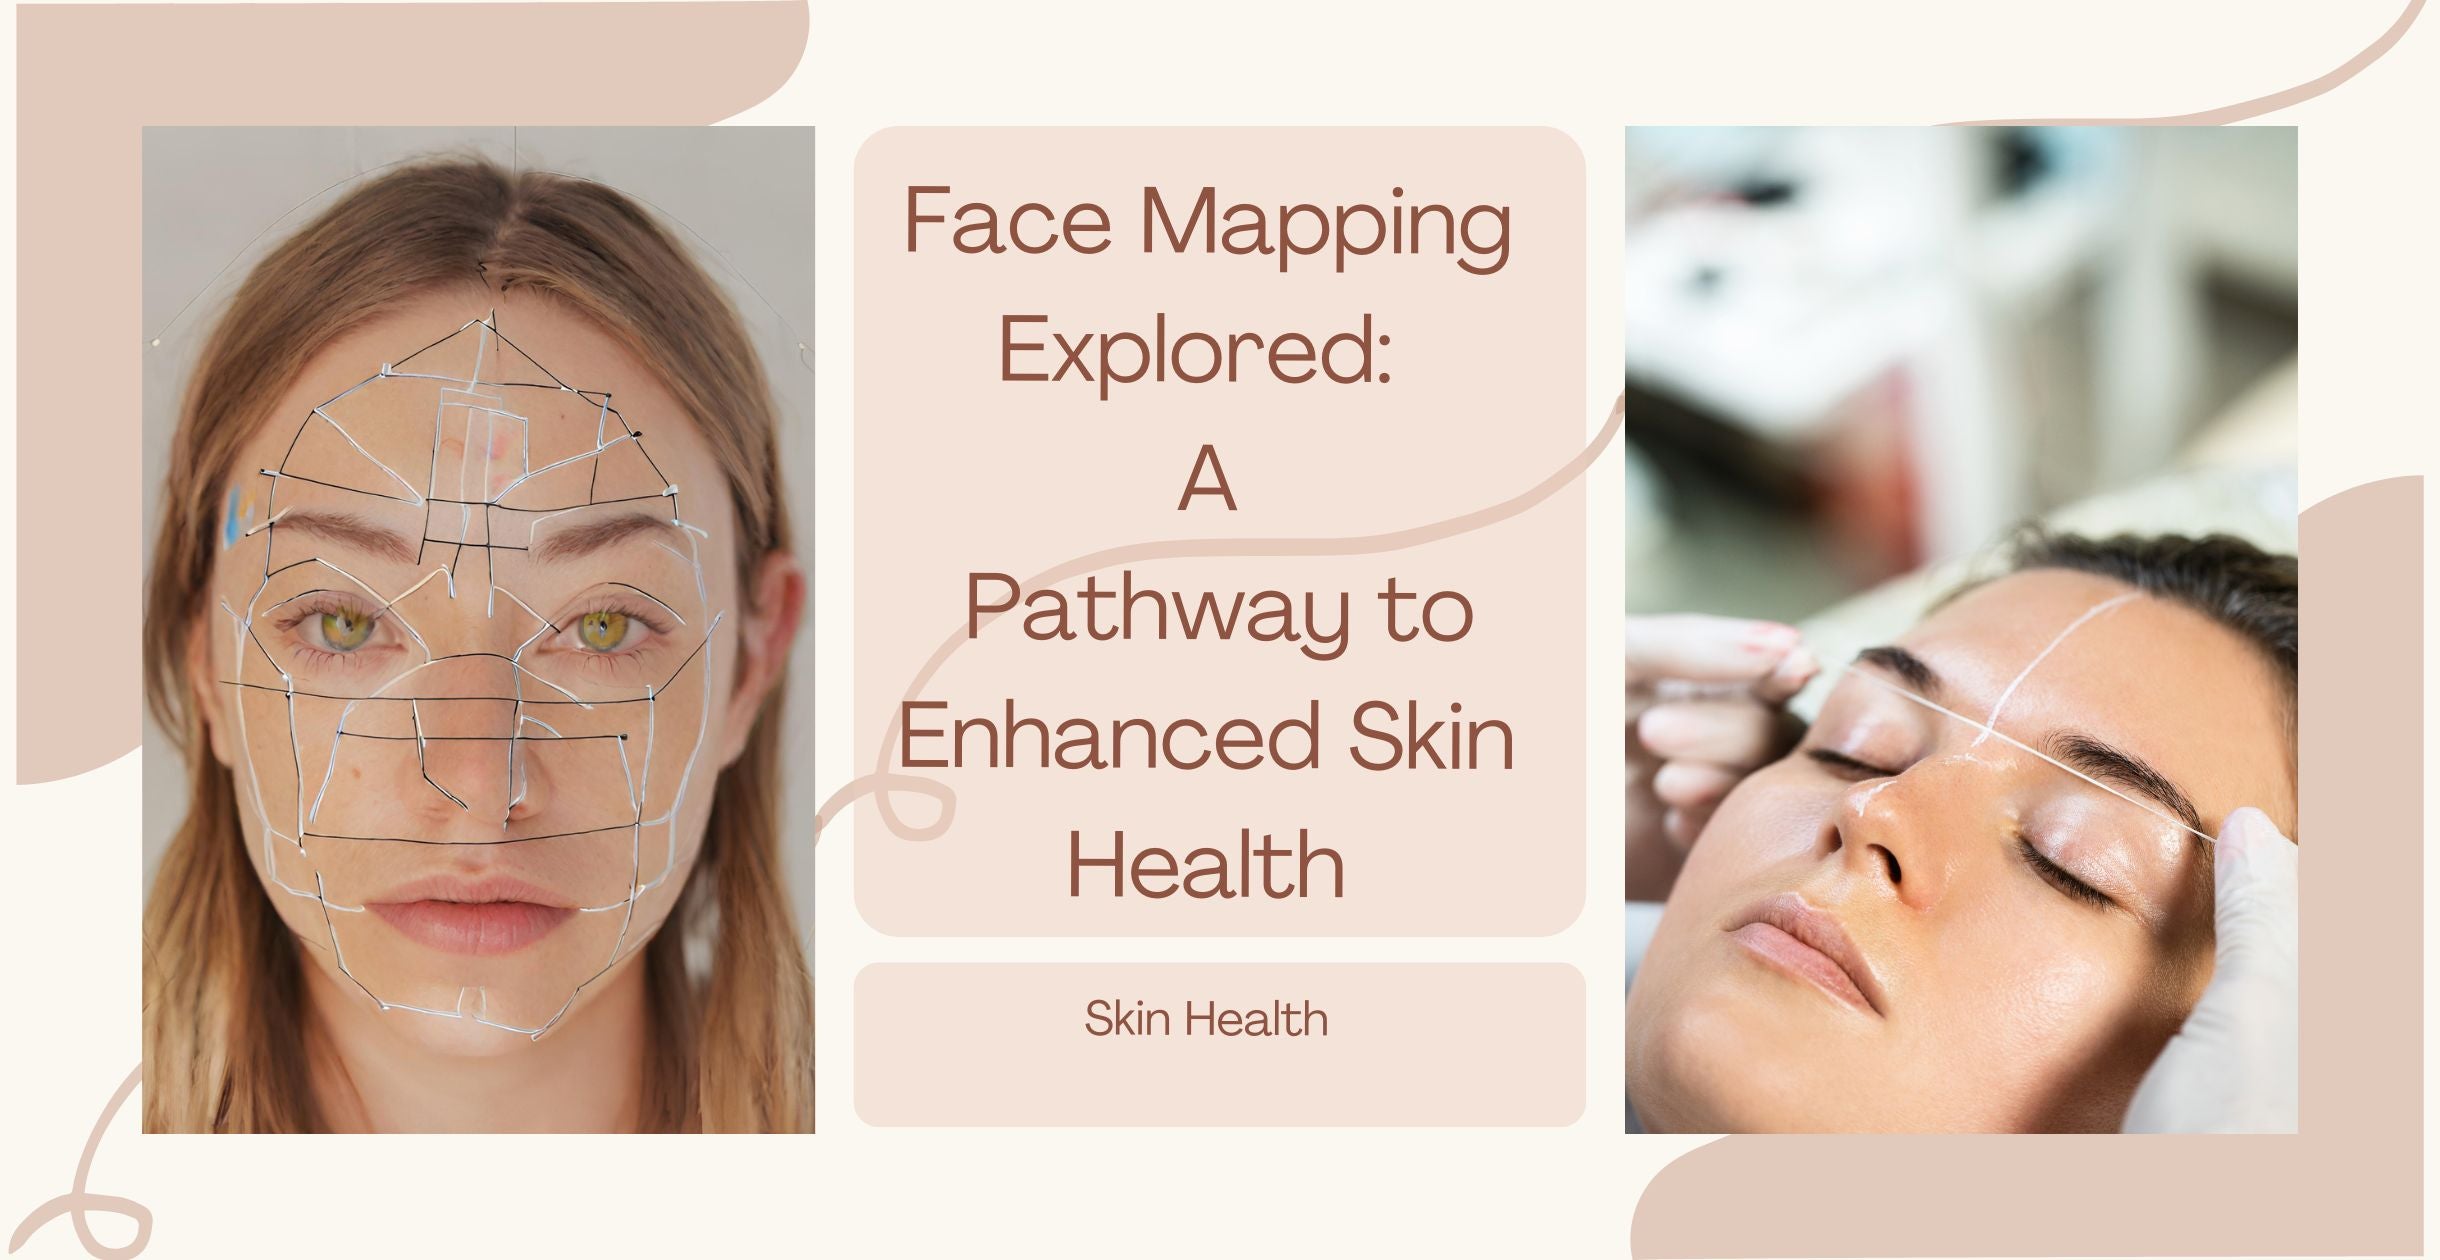 Face Mapping Explored: A Pathway to Enhanced Skin Health